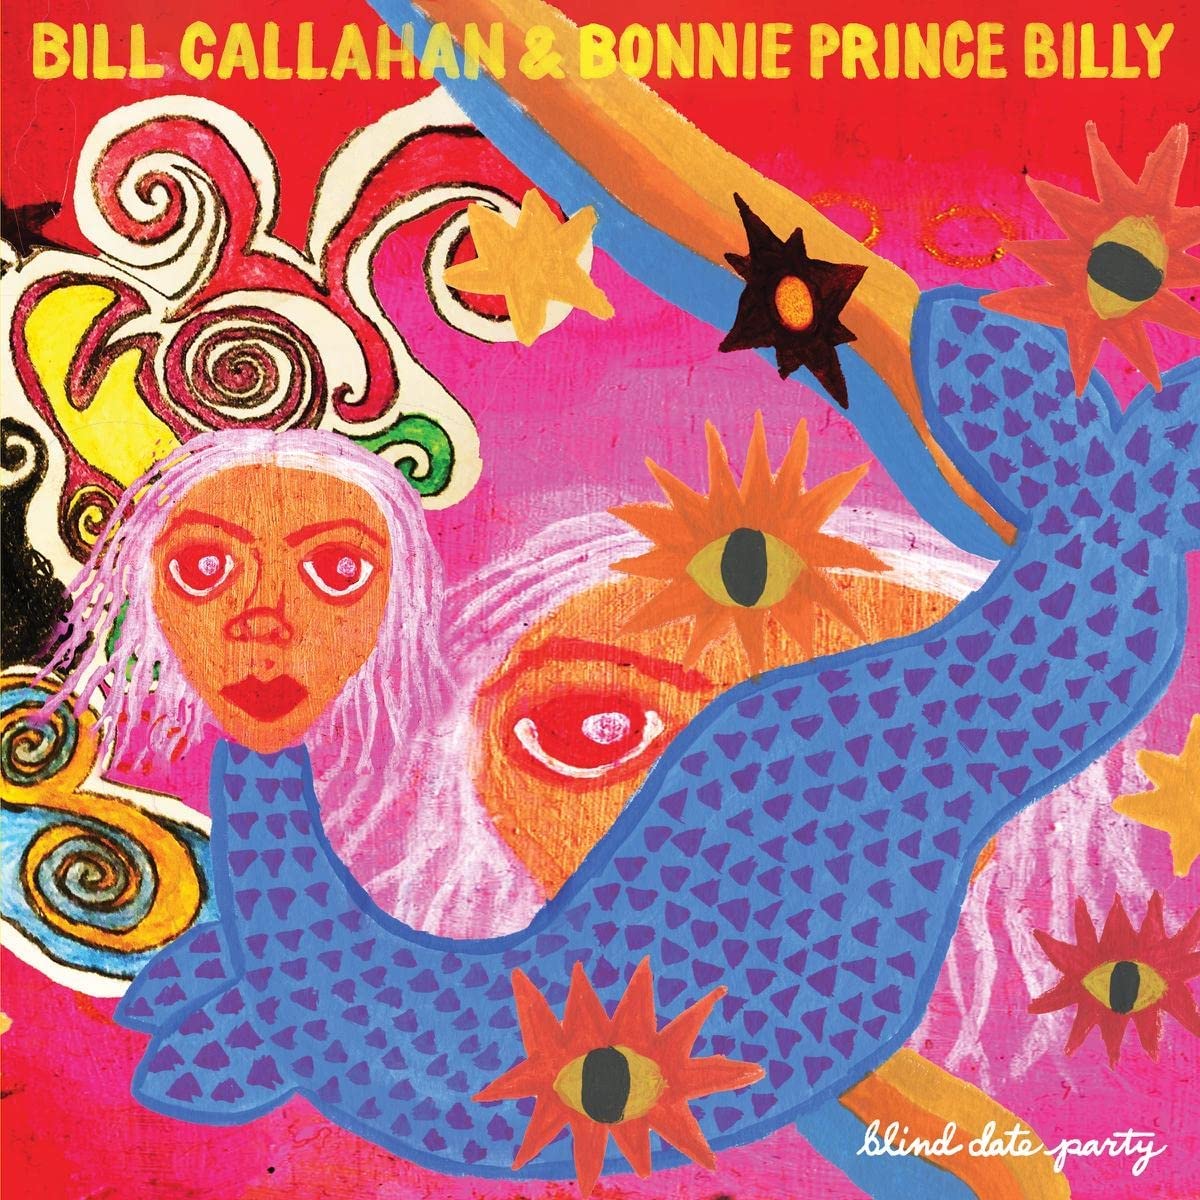 Bill Callahan & Bonnie Prince Billy - Blind Date Party - 2CD